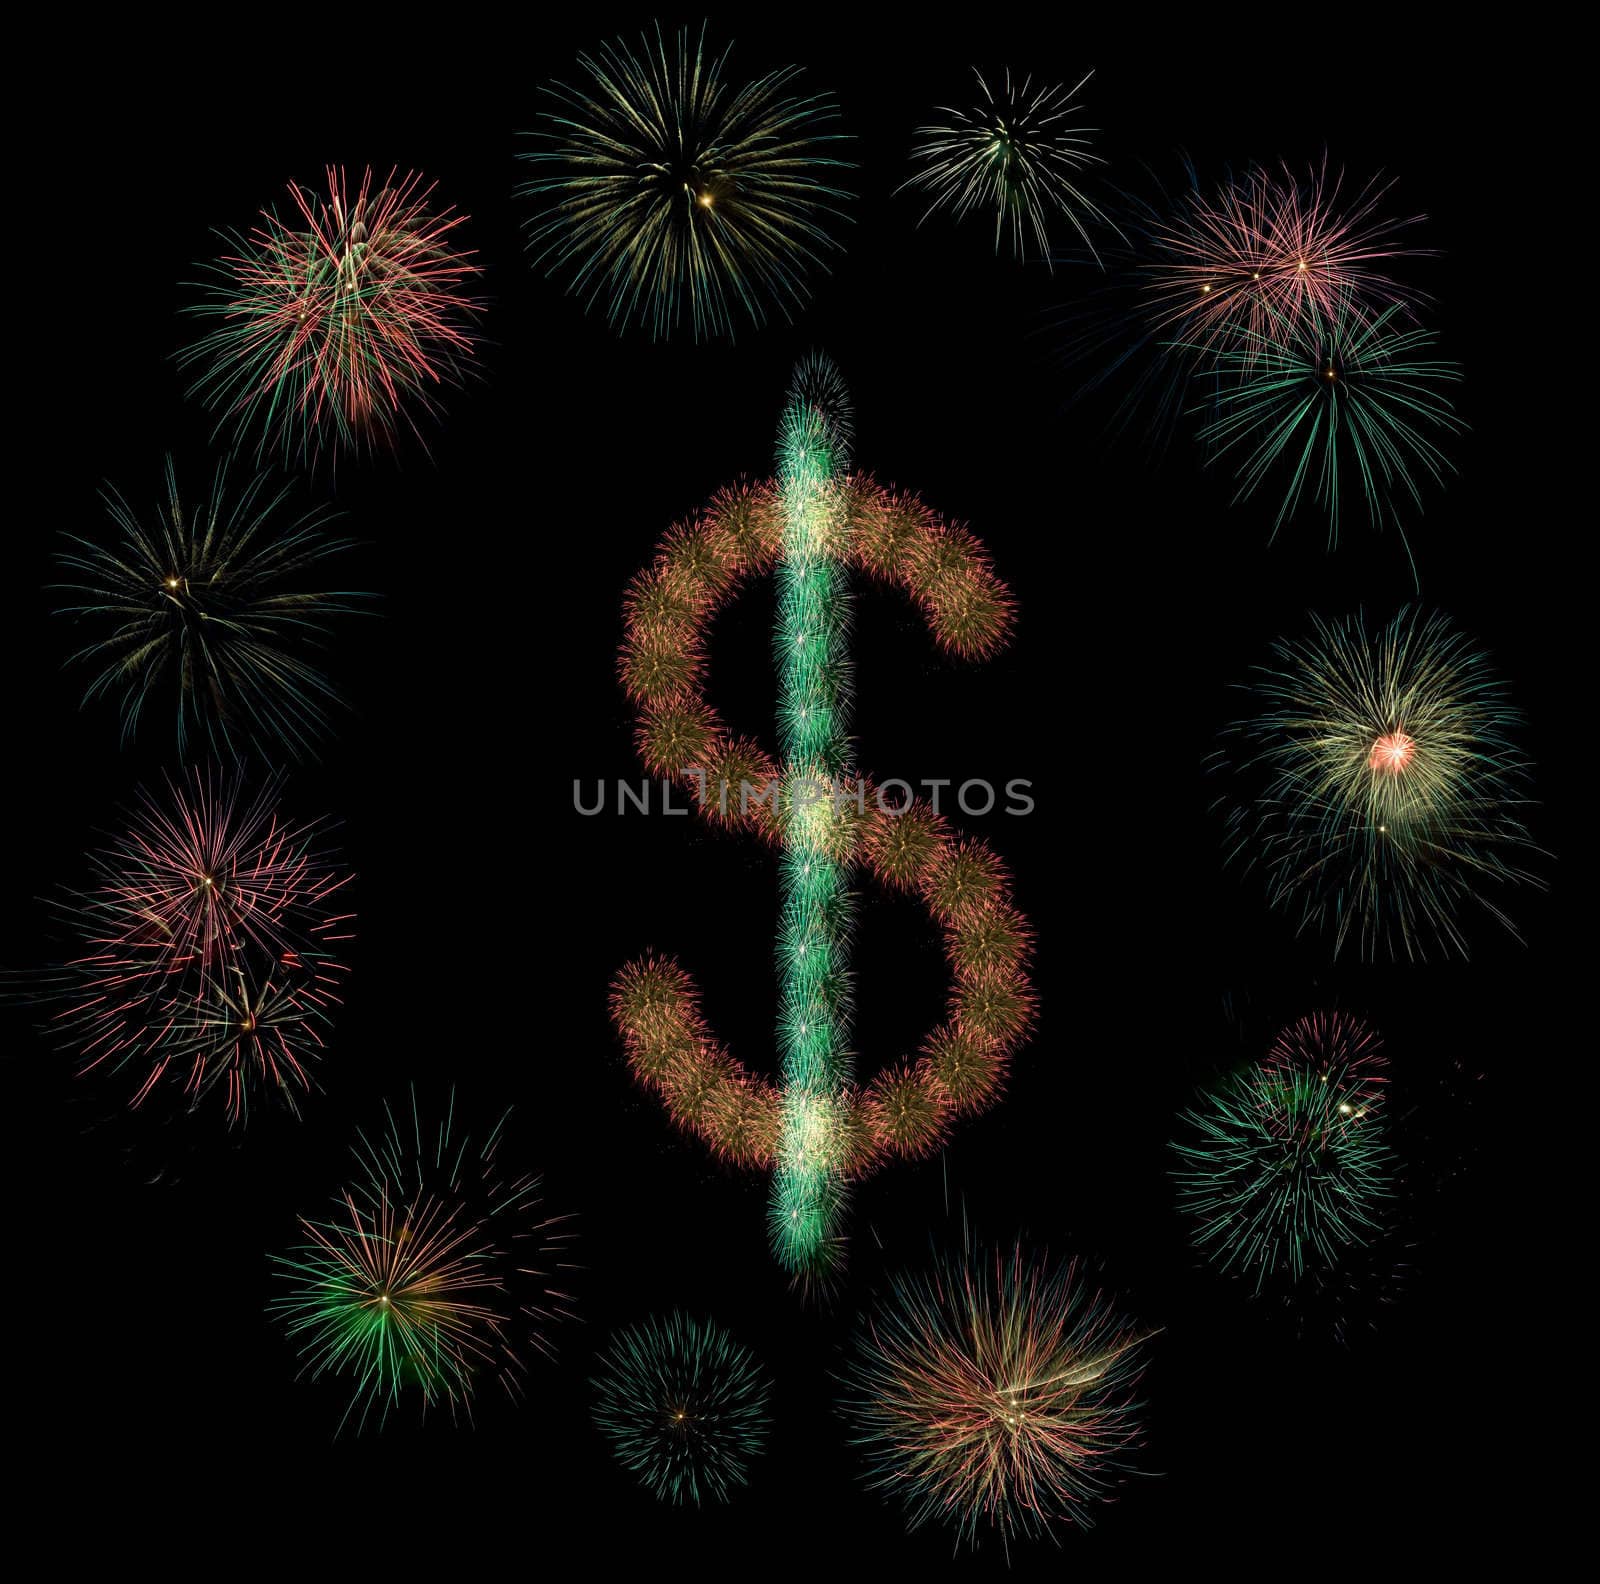 Dollar sign inside a circle made of fireworks shots on black background.